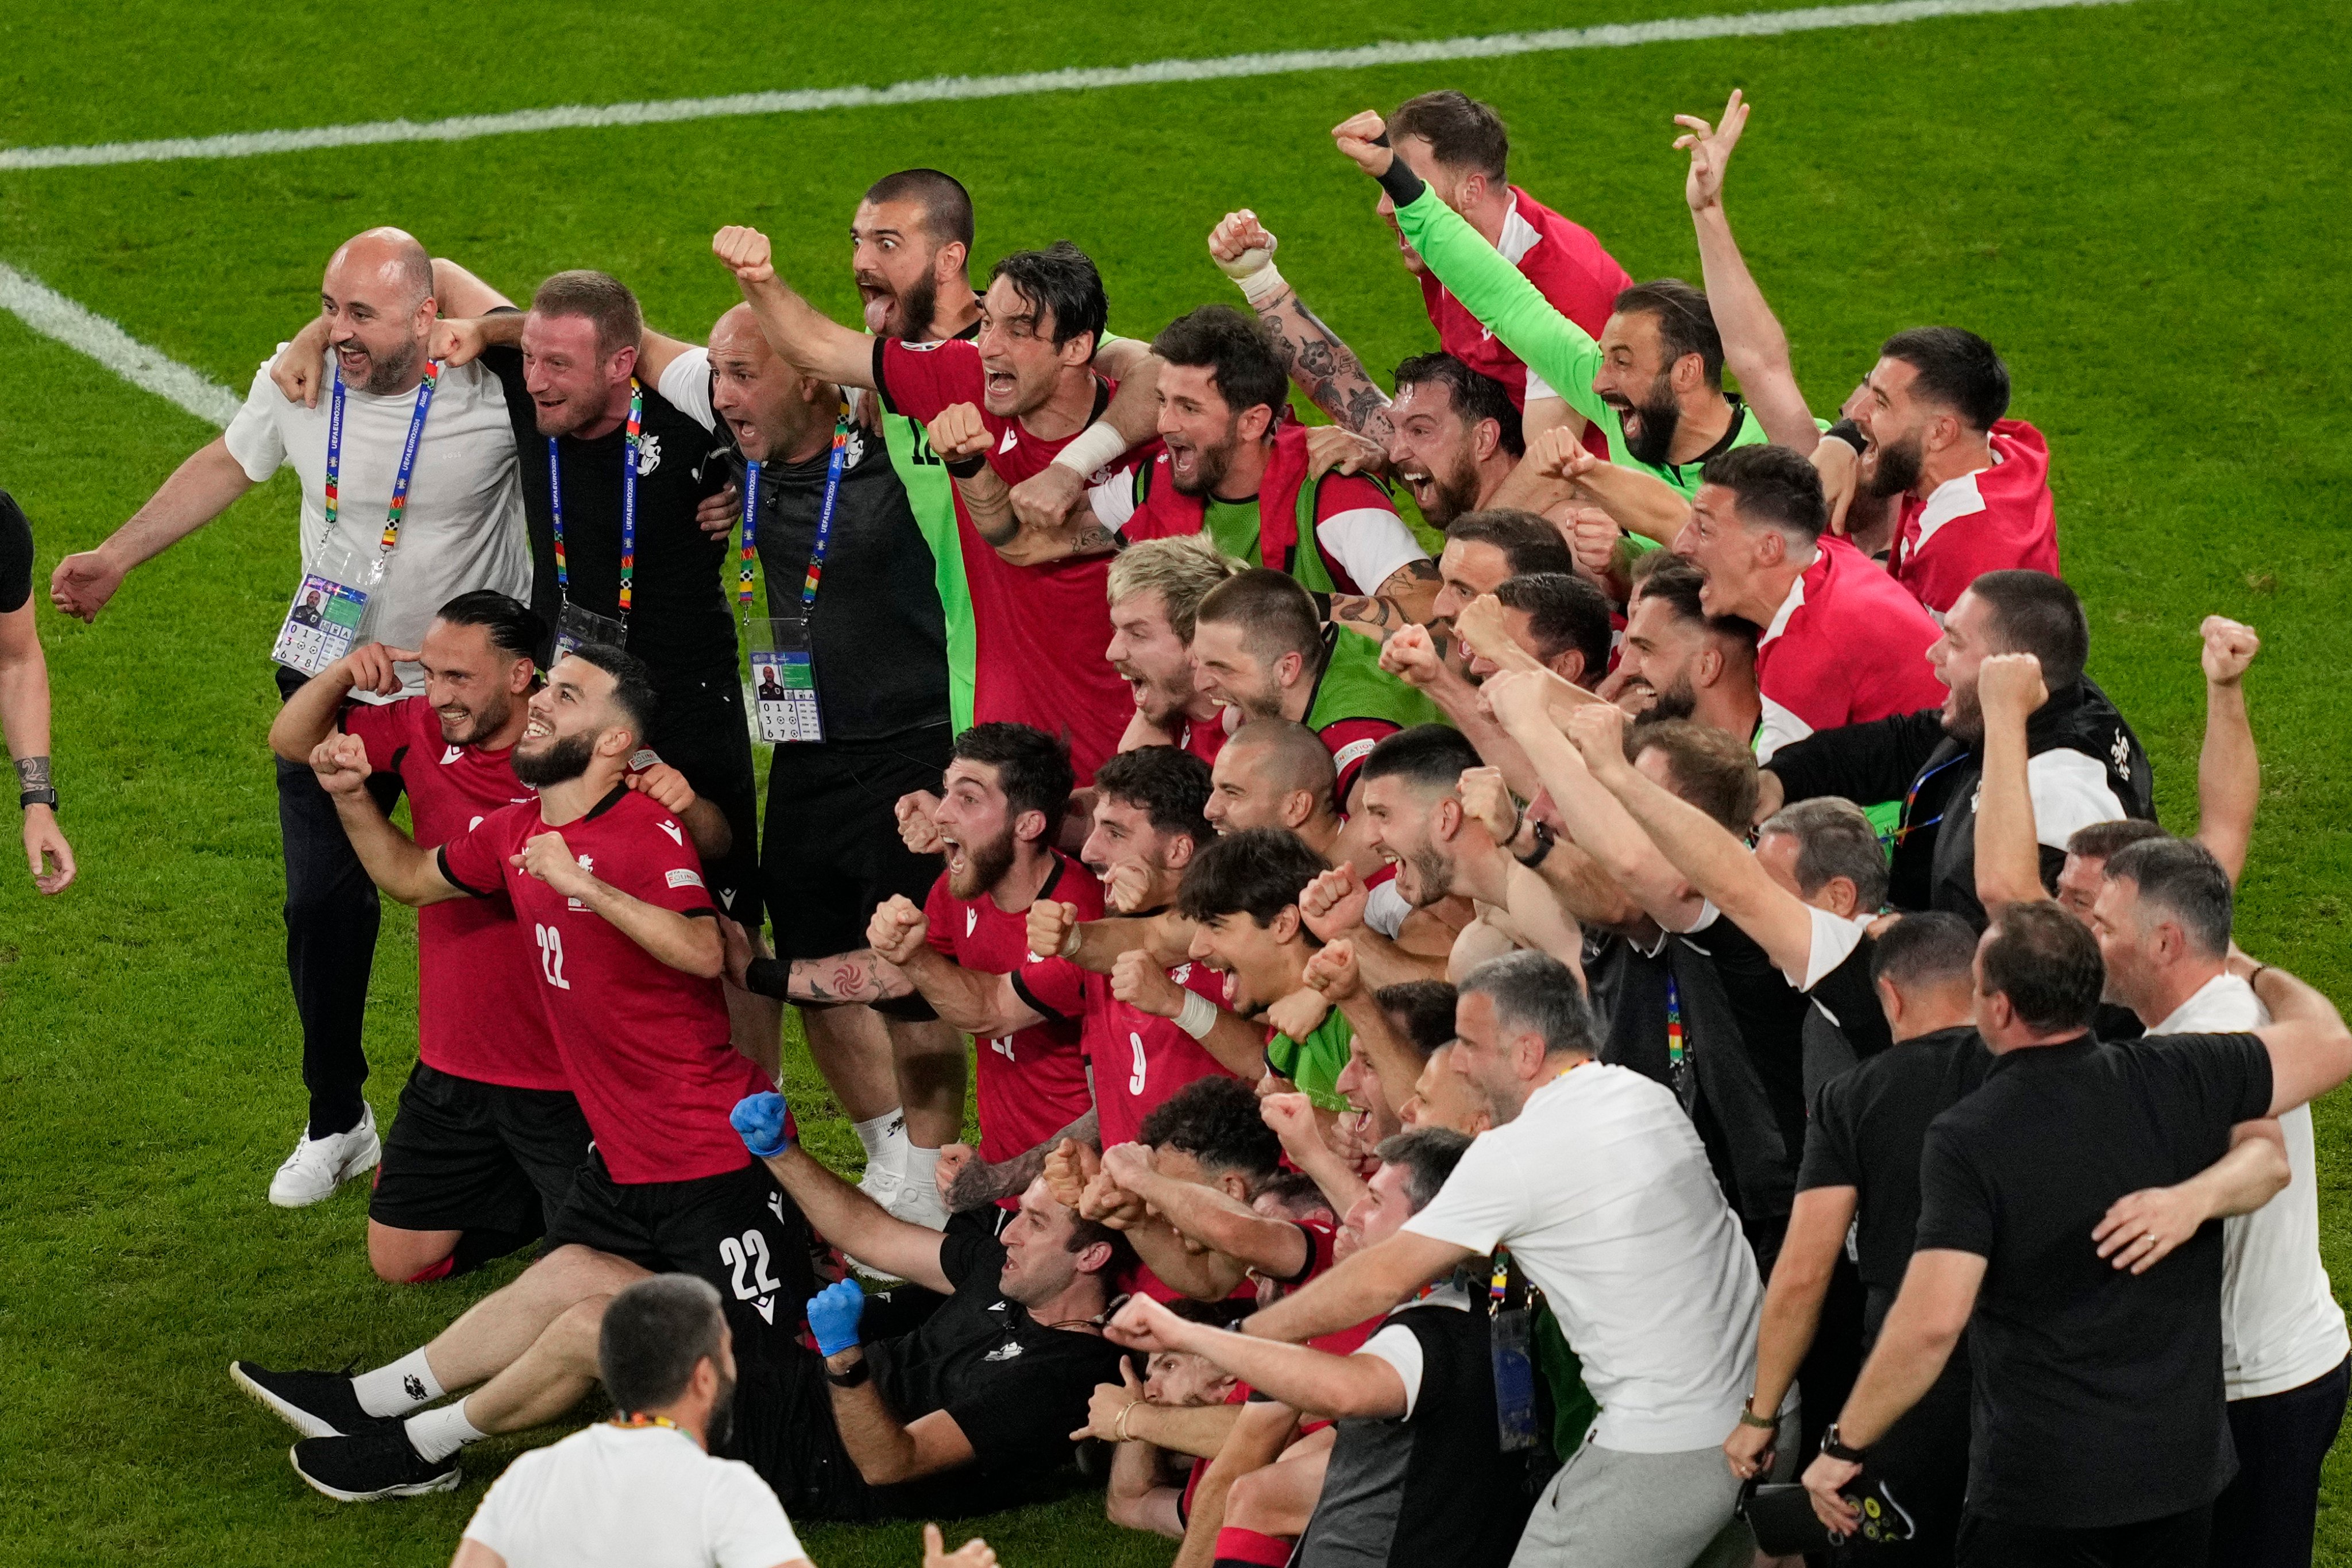 Georgia’s players celebrate after their historic win over Portugal to reach the Euros knock-out phase for the first time. Photo: AP